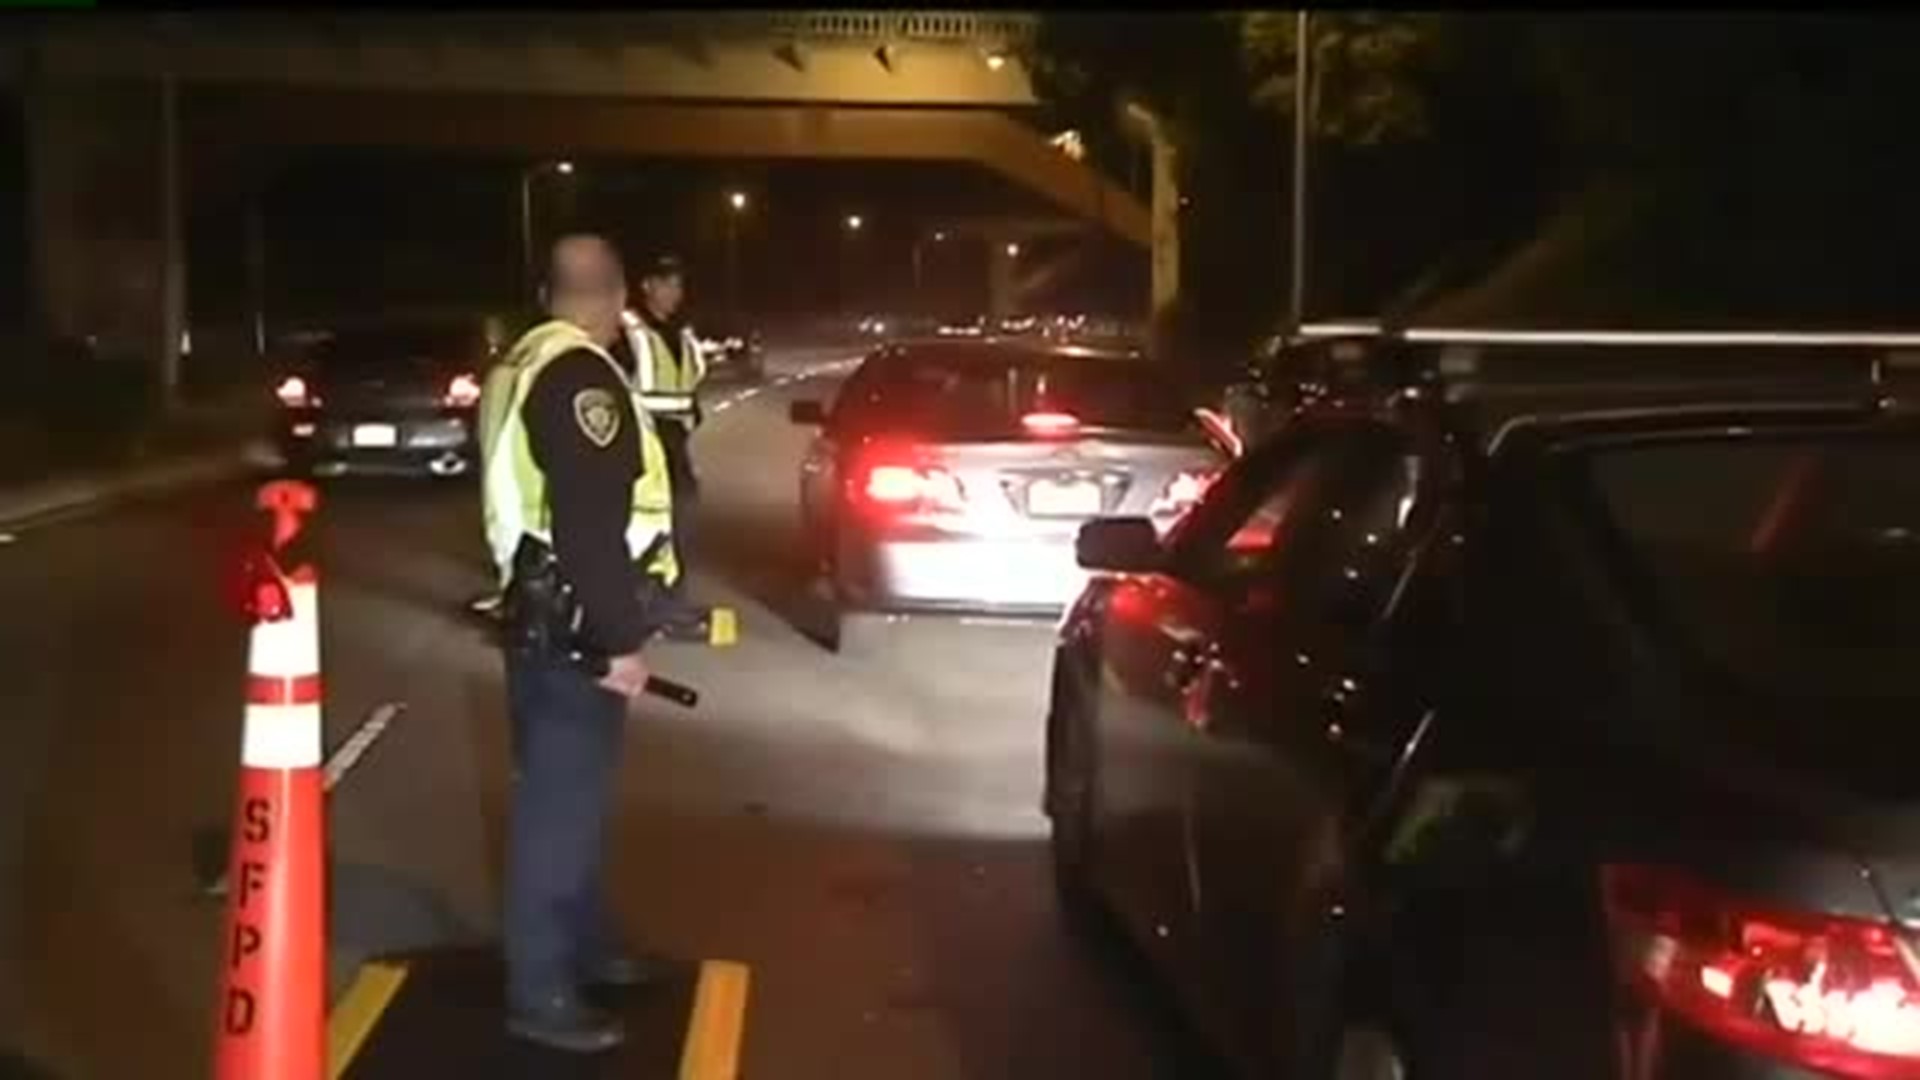 Harsher Penalties for DUI Drivers